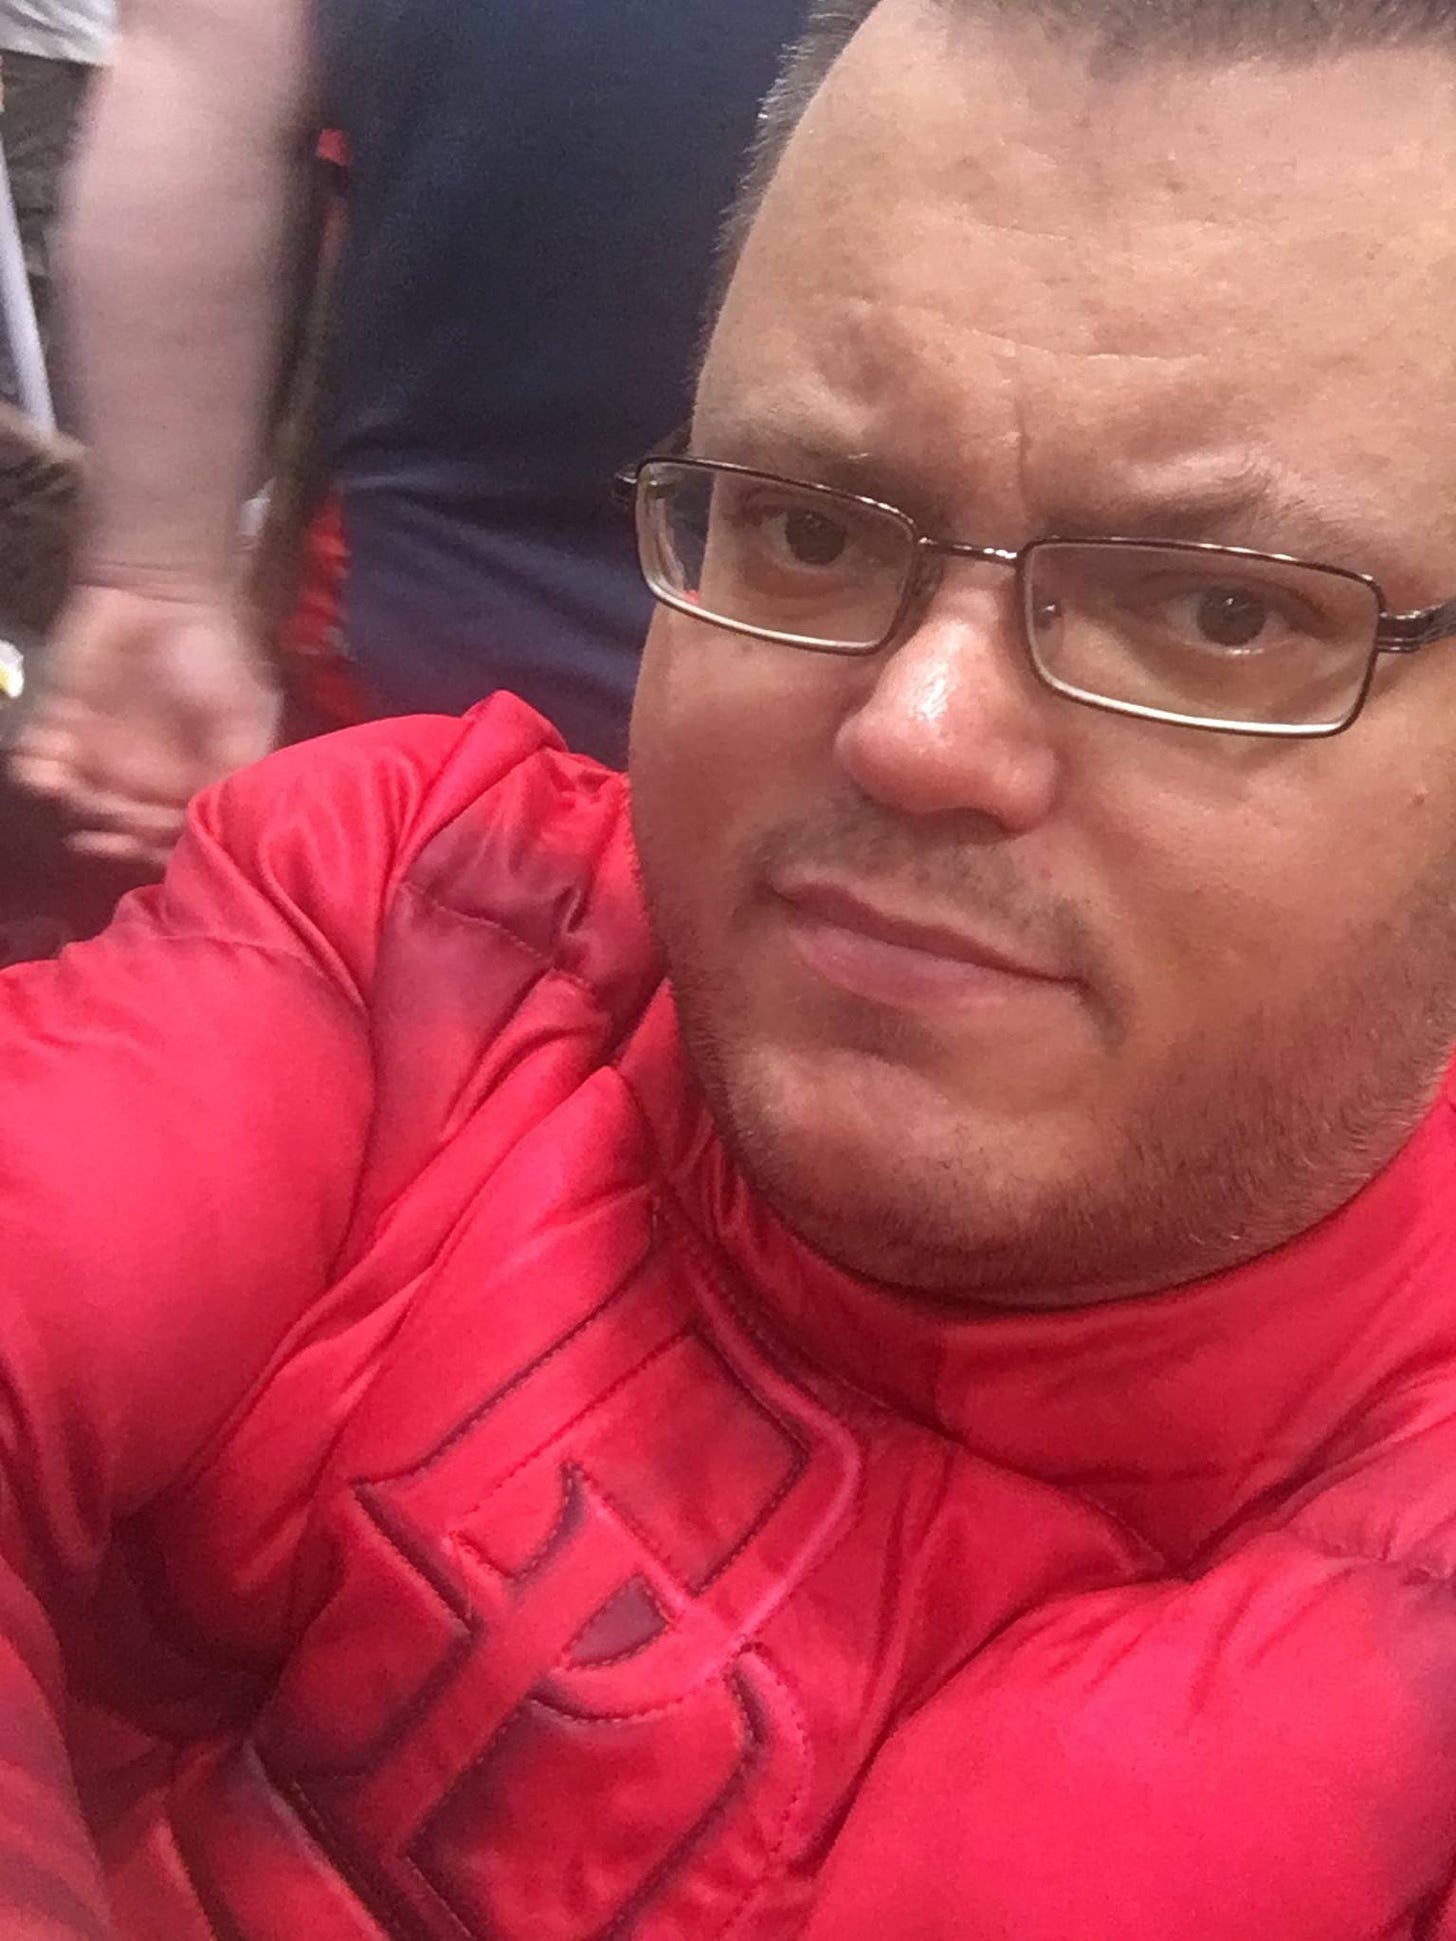 Close-up photo of a bespectacled man (Sam) with a wistful smile, wearing a red superhero costume.